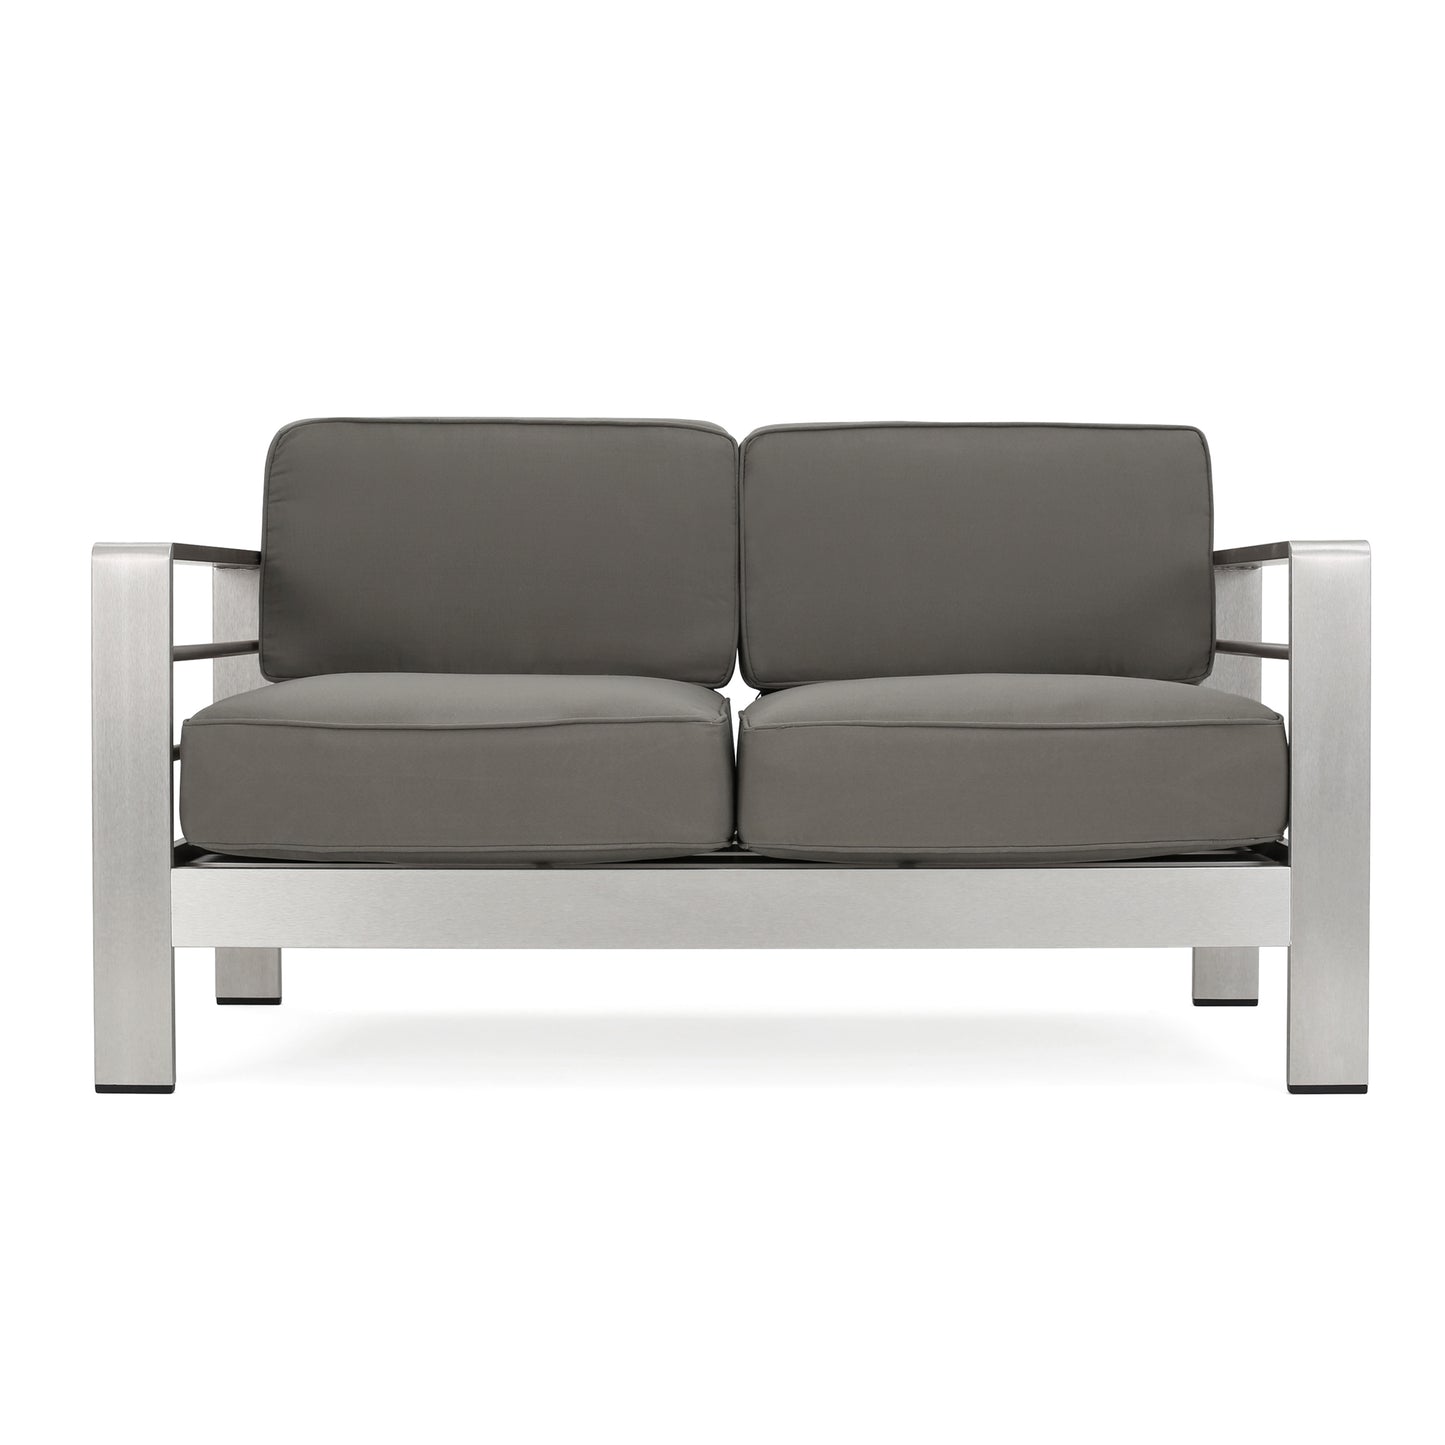 Emily Coral Outdoor 4-Seater Aluminum Loveseat and Ottoman Set, Silver and Khaki